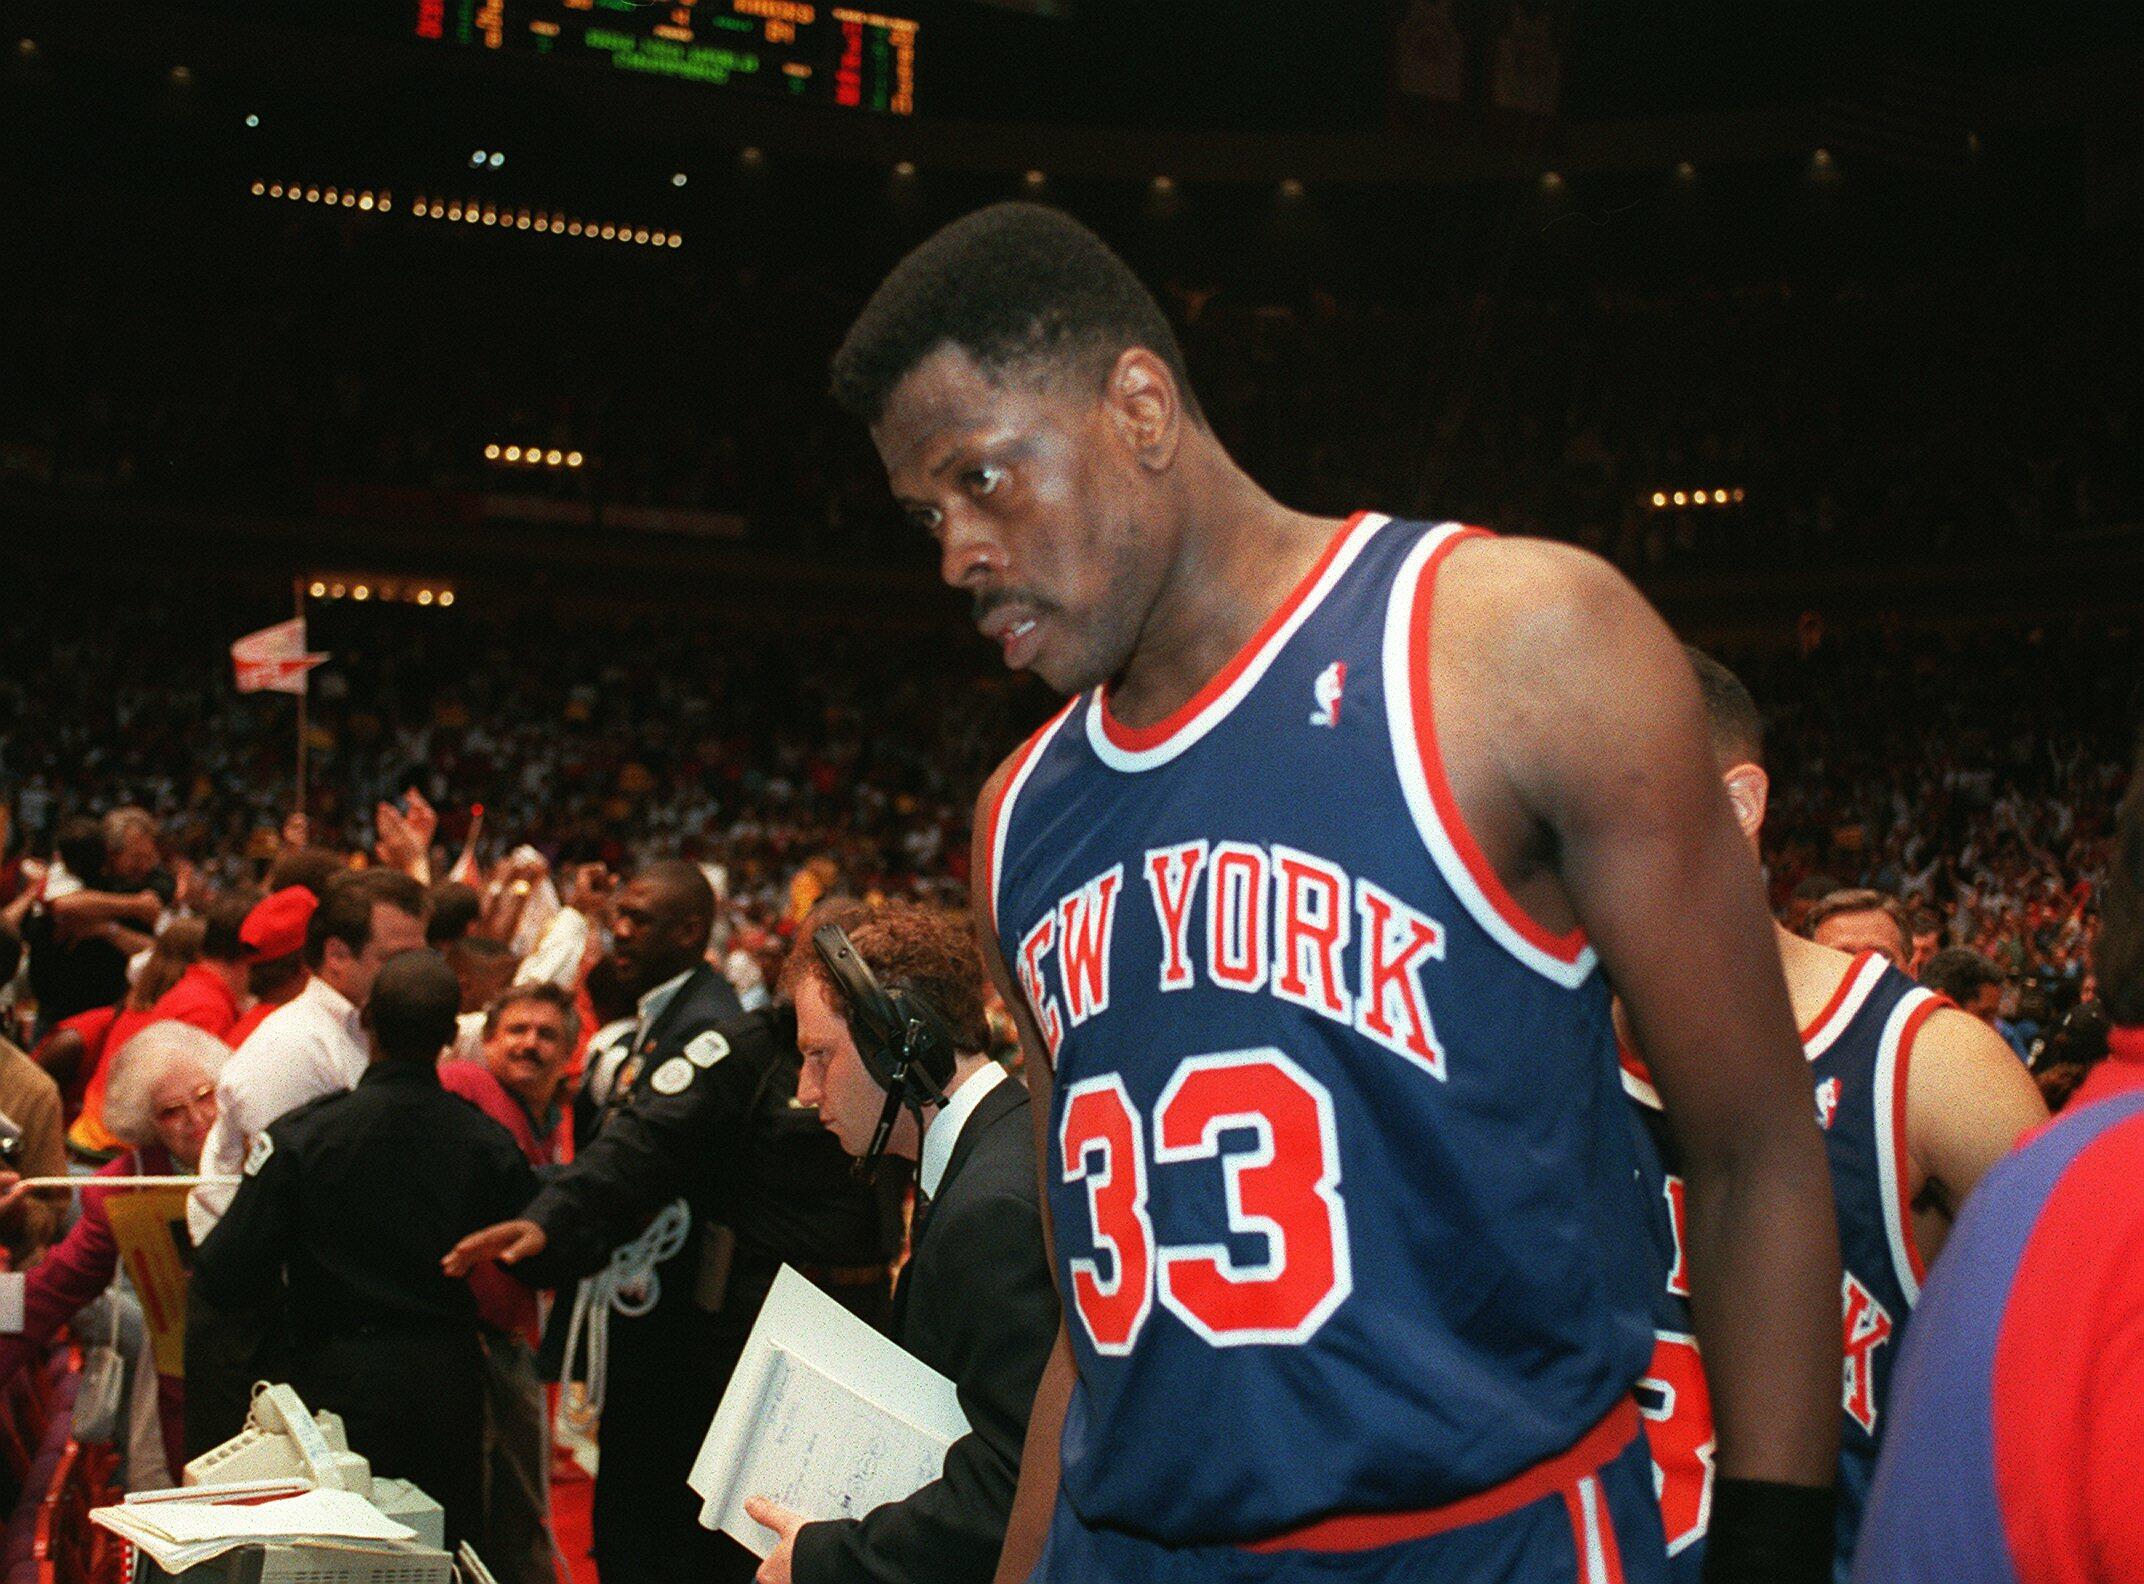 23 Jun 1994: NEW YORK KNICK PATRICK EWING WALKS OFF THE COURT FOLLOWING THE KNICK''S 90-84 LOSS TO THE HOUSTON ROCKETS FOR THE NBA CHAMPIONSHIP AT THE SUMMIT IN HOUSTON.